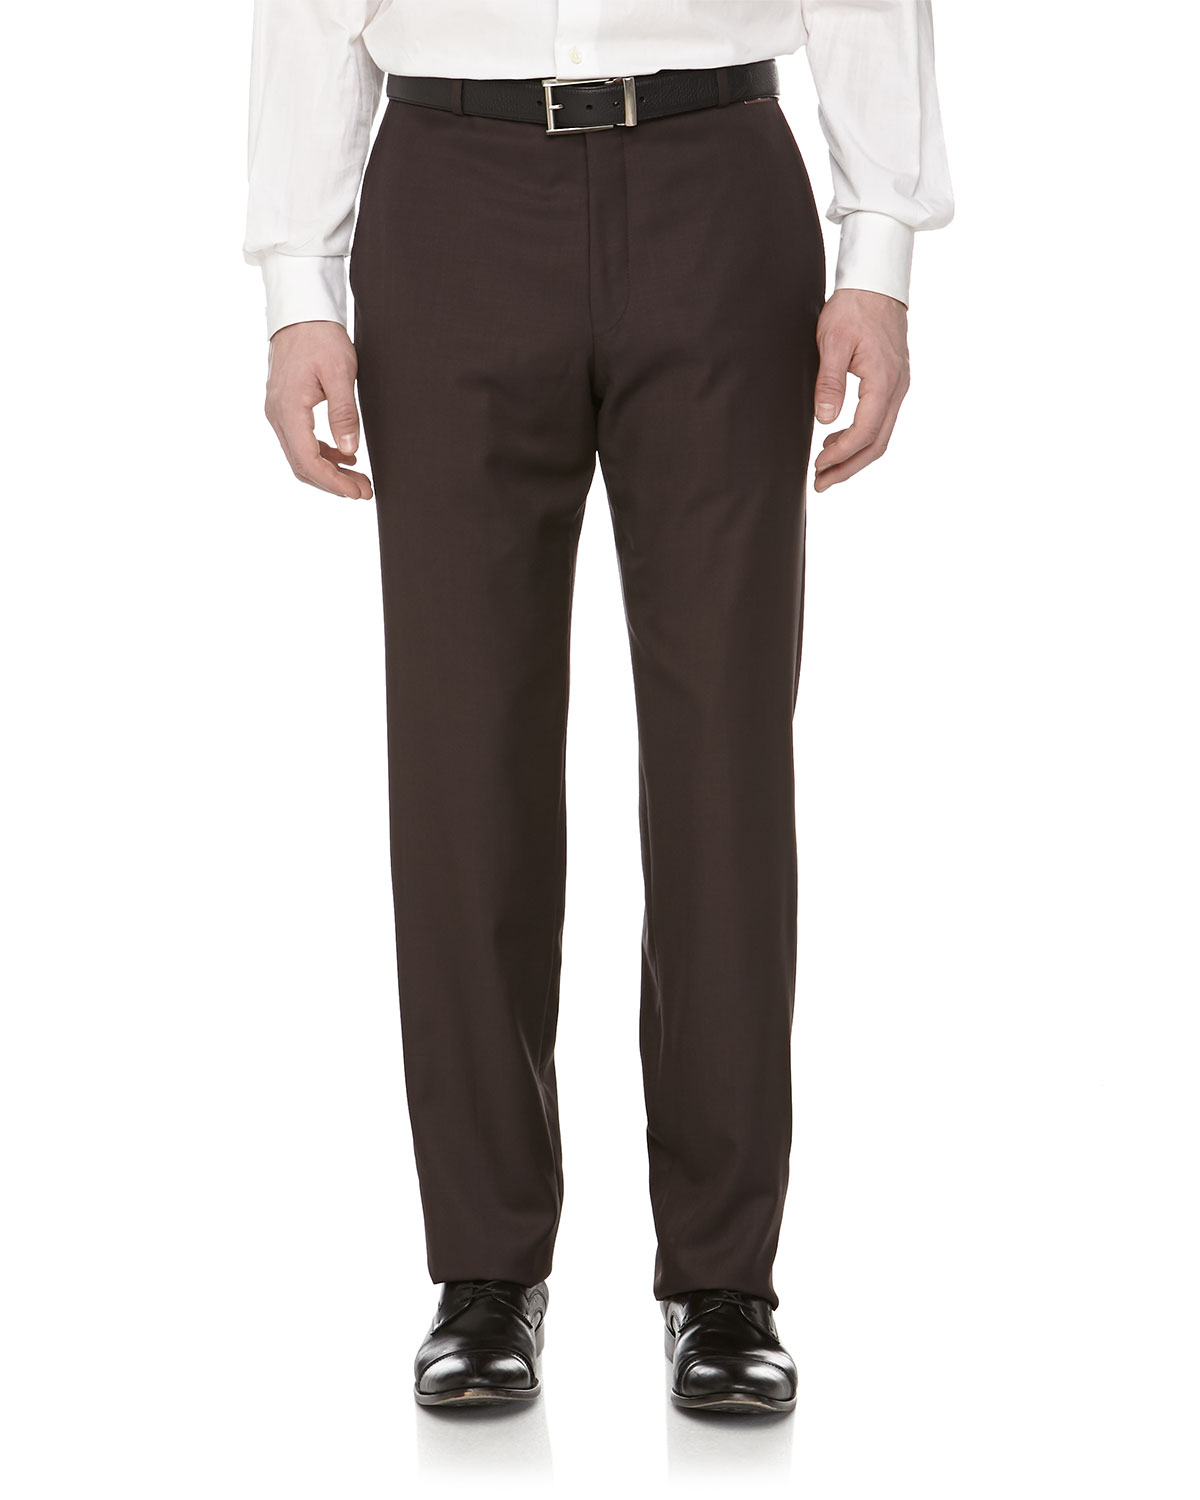 Lyst - Hickey Freeman Wool Suiting Dress Pants in Brown for Men